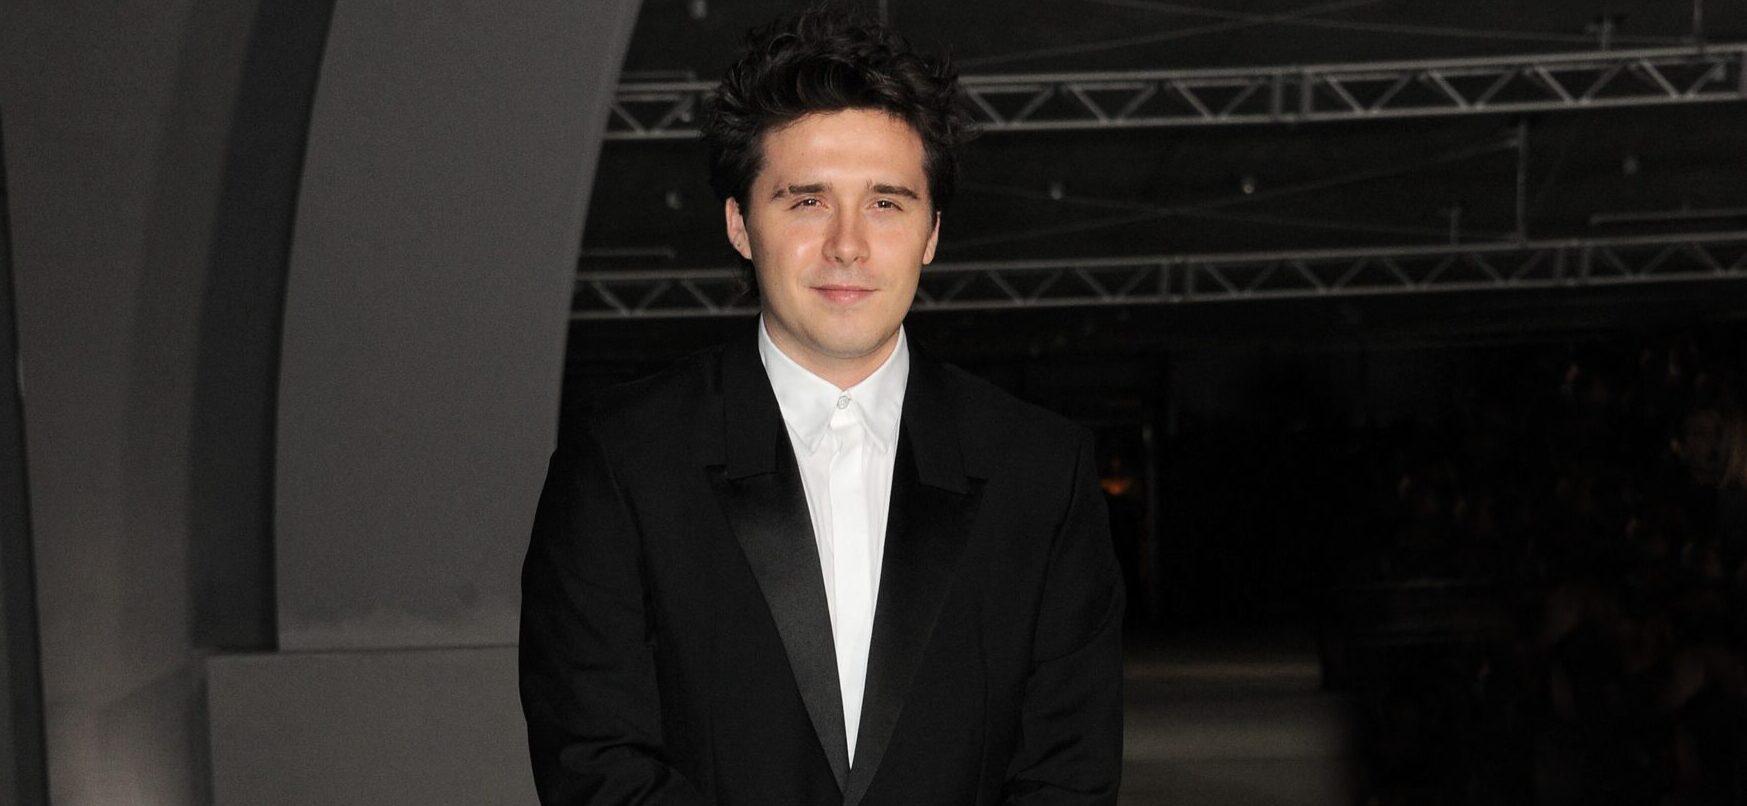 Brooklyn Beckham Fondly Remembers Soccer Playing Days, Is He Making A Comeback?